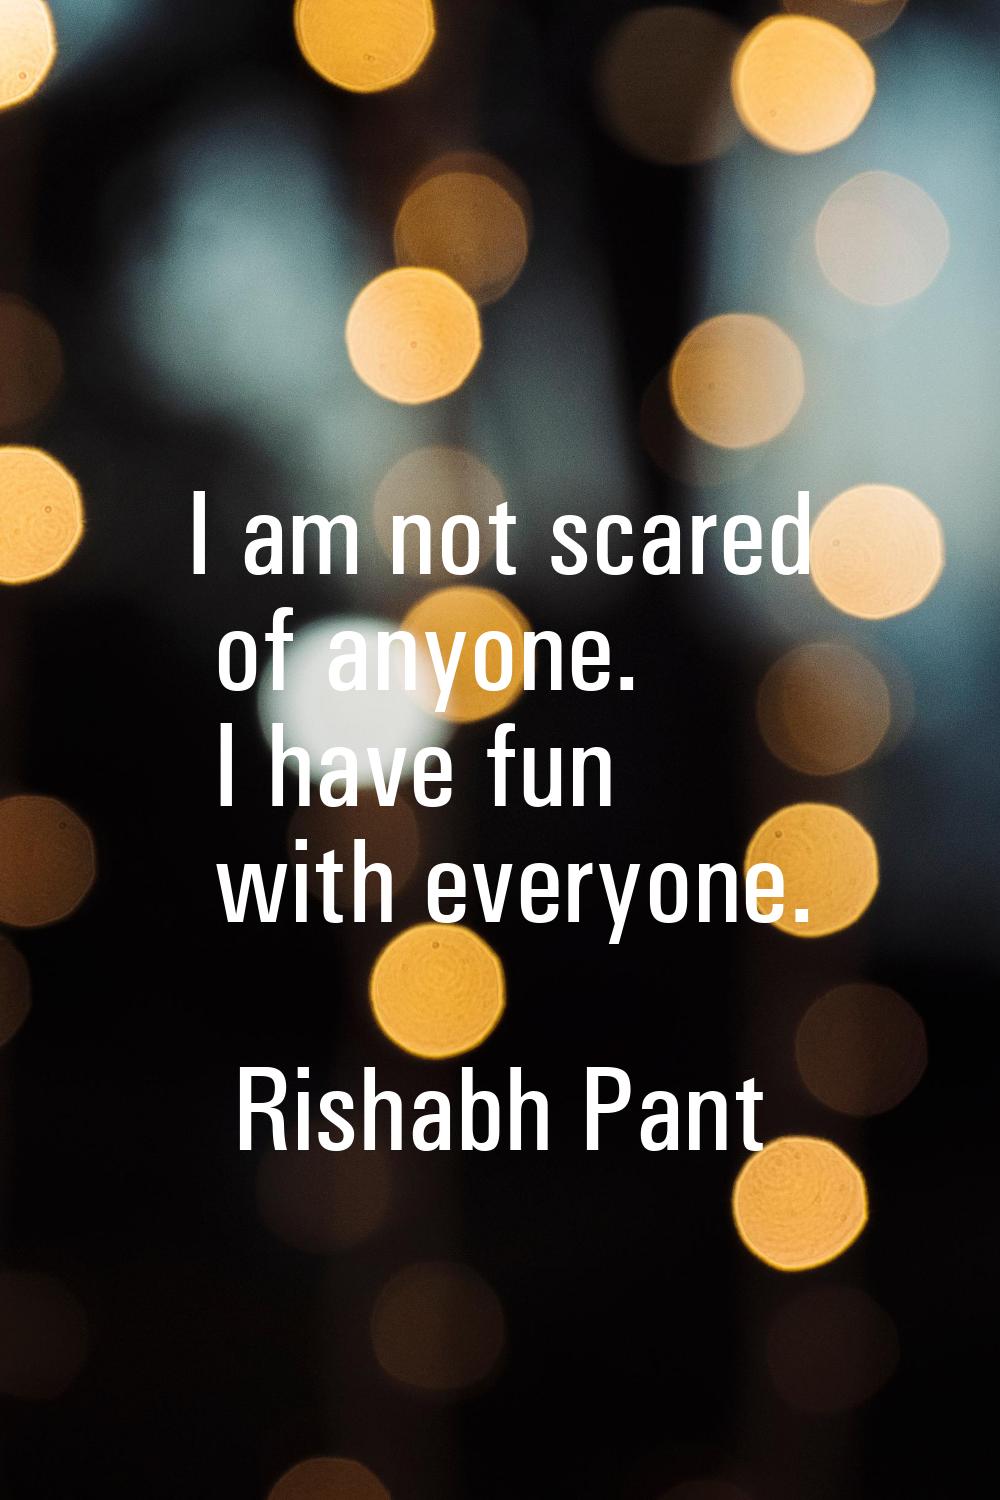 I am not scared of anyone. I have fun with everyone.